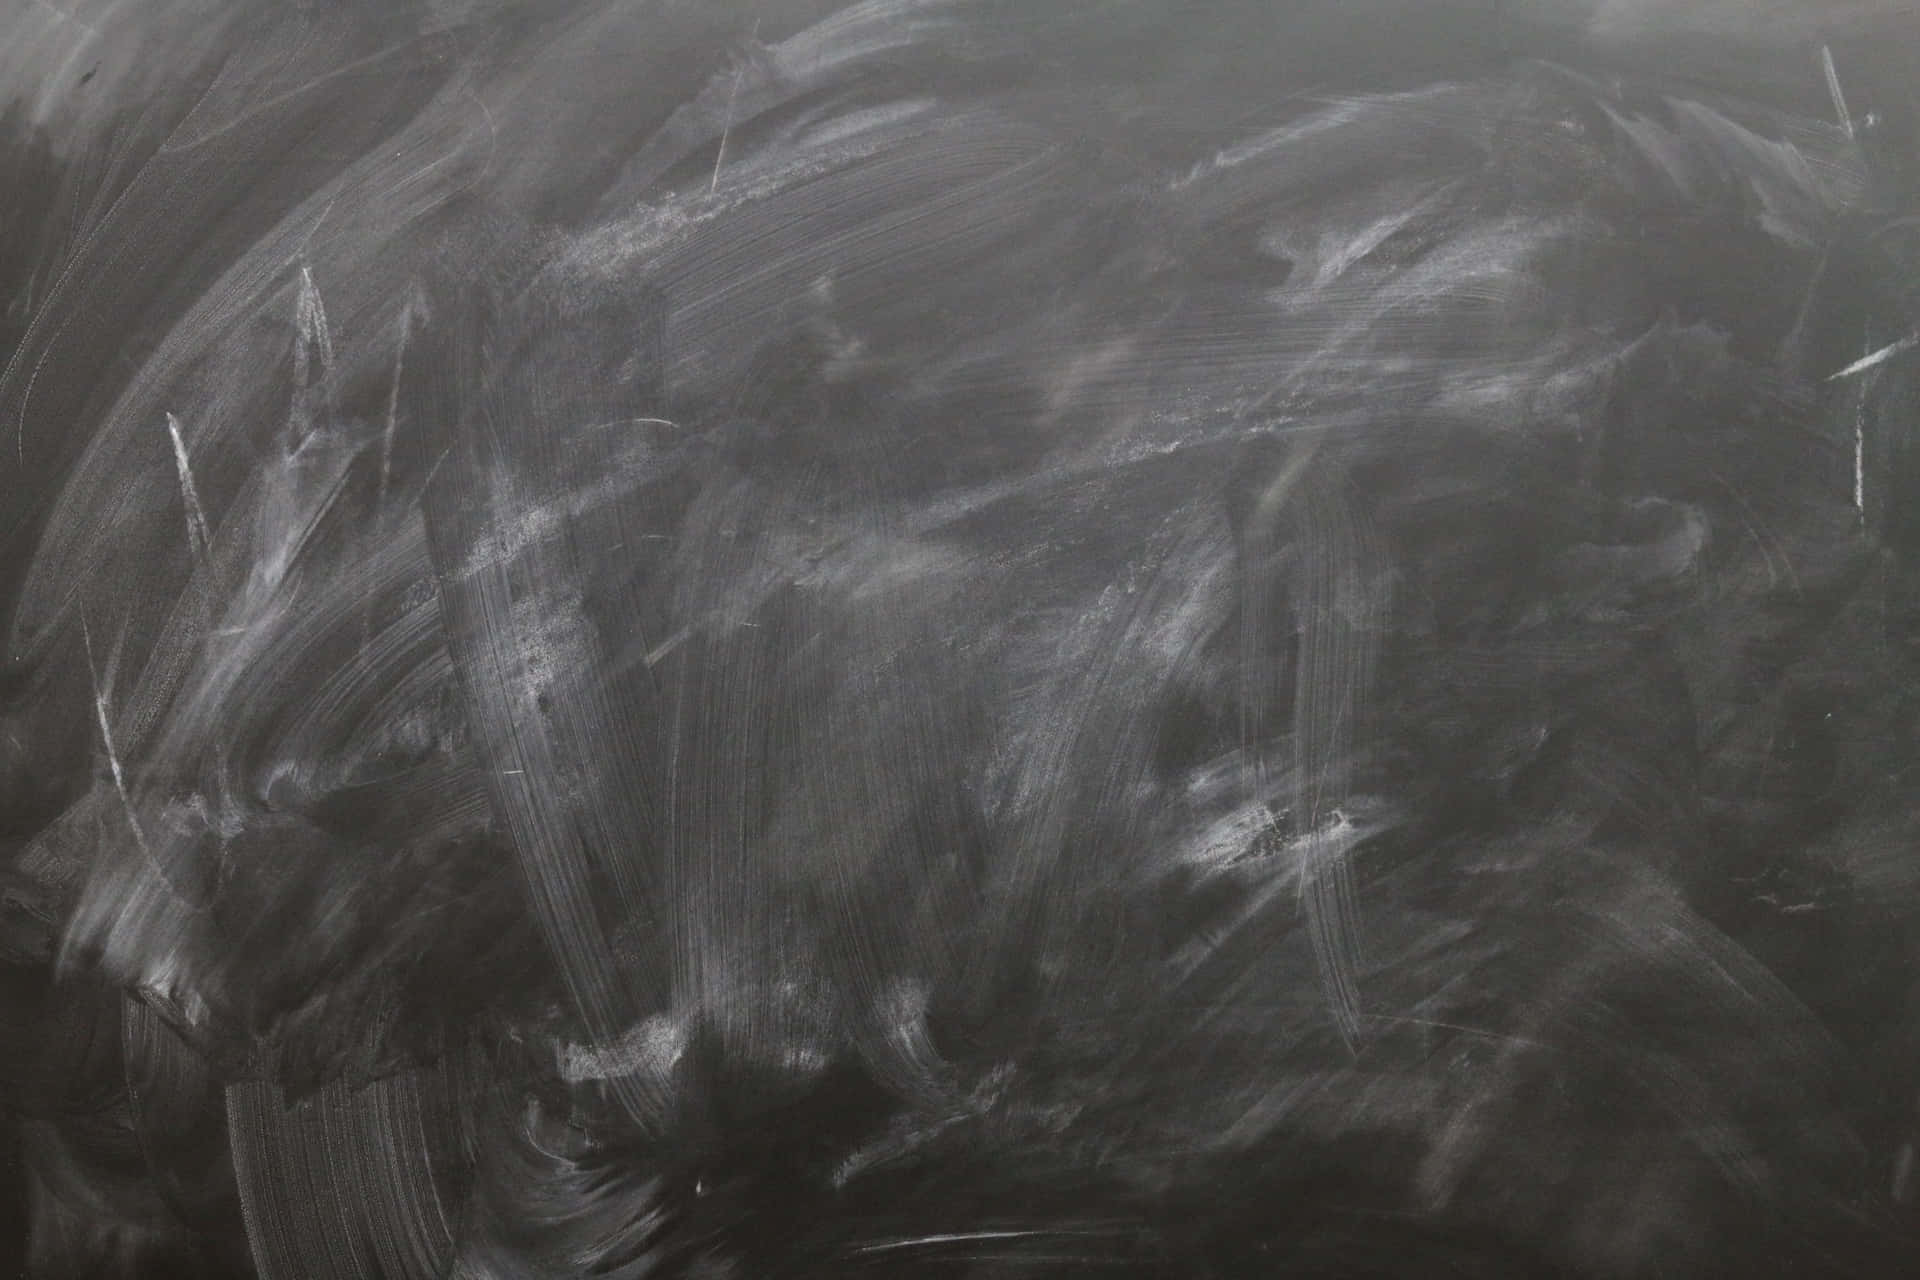 A Blackboard With A White Chalk Drawing